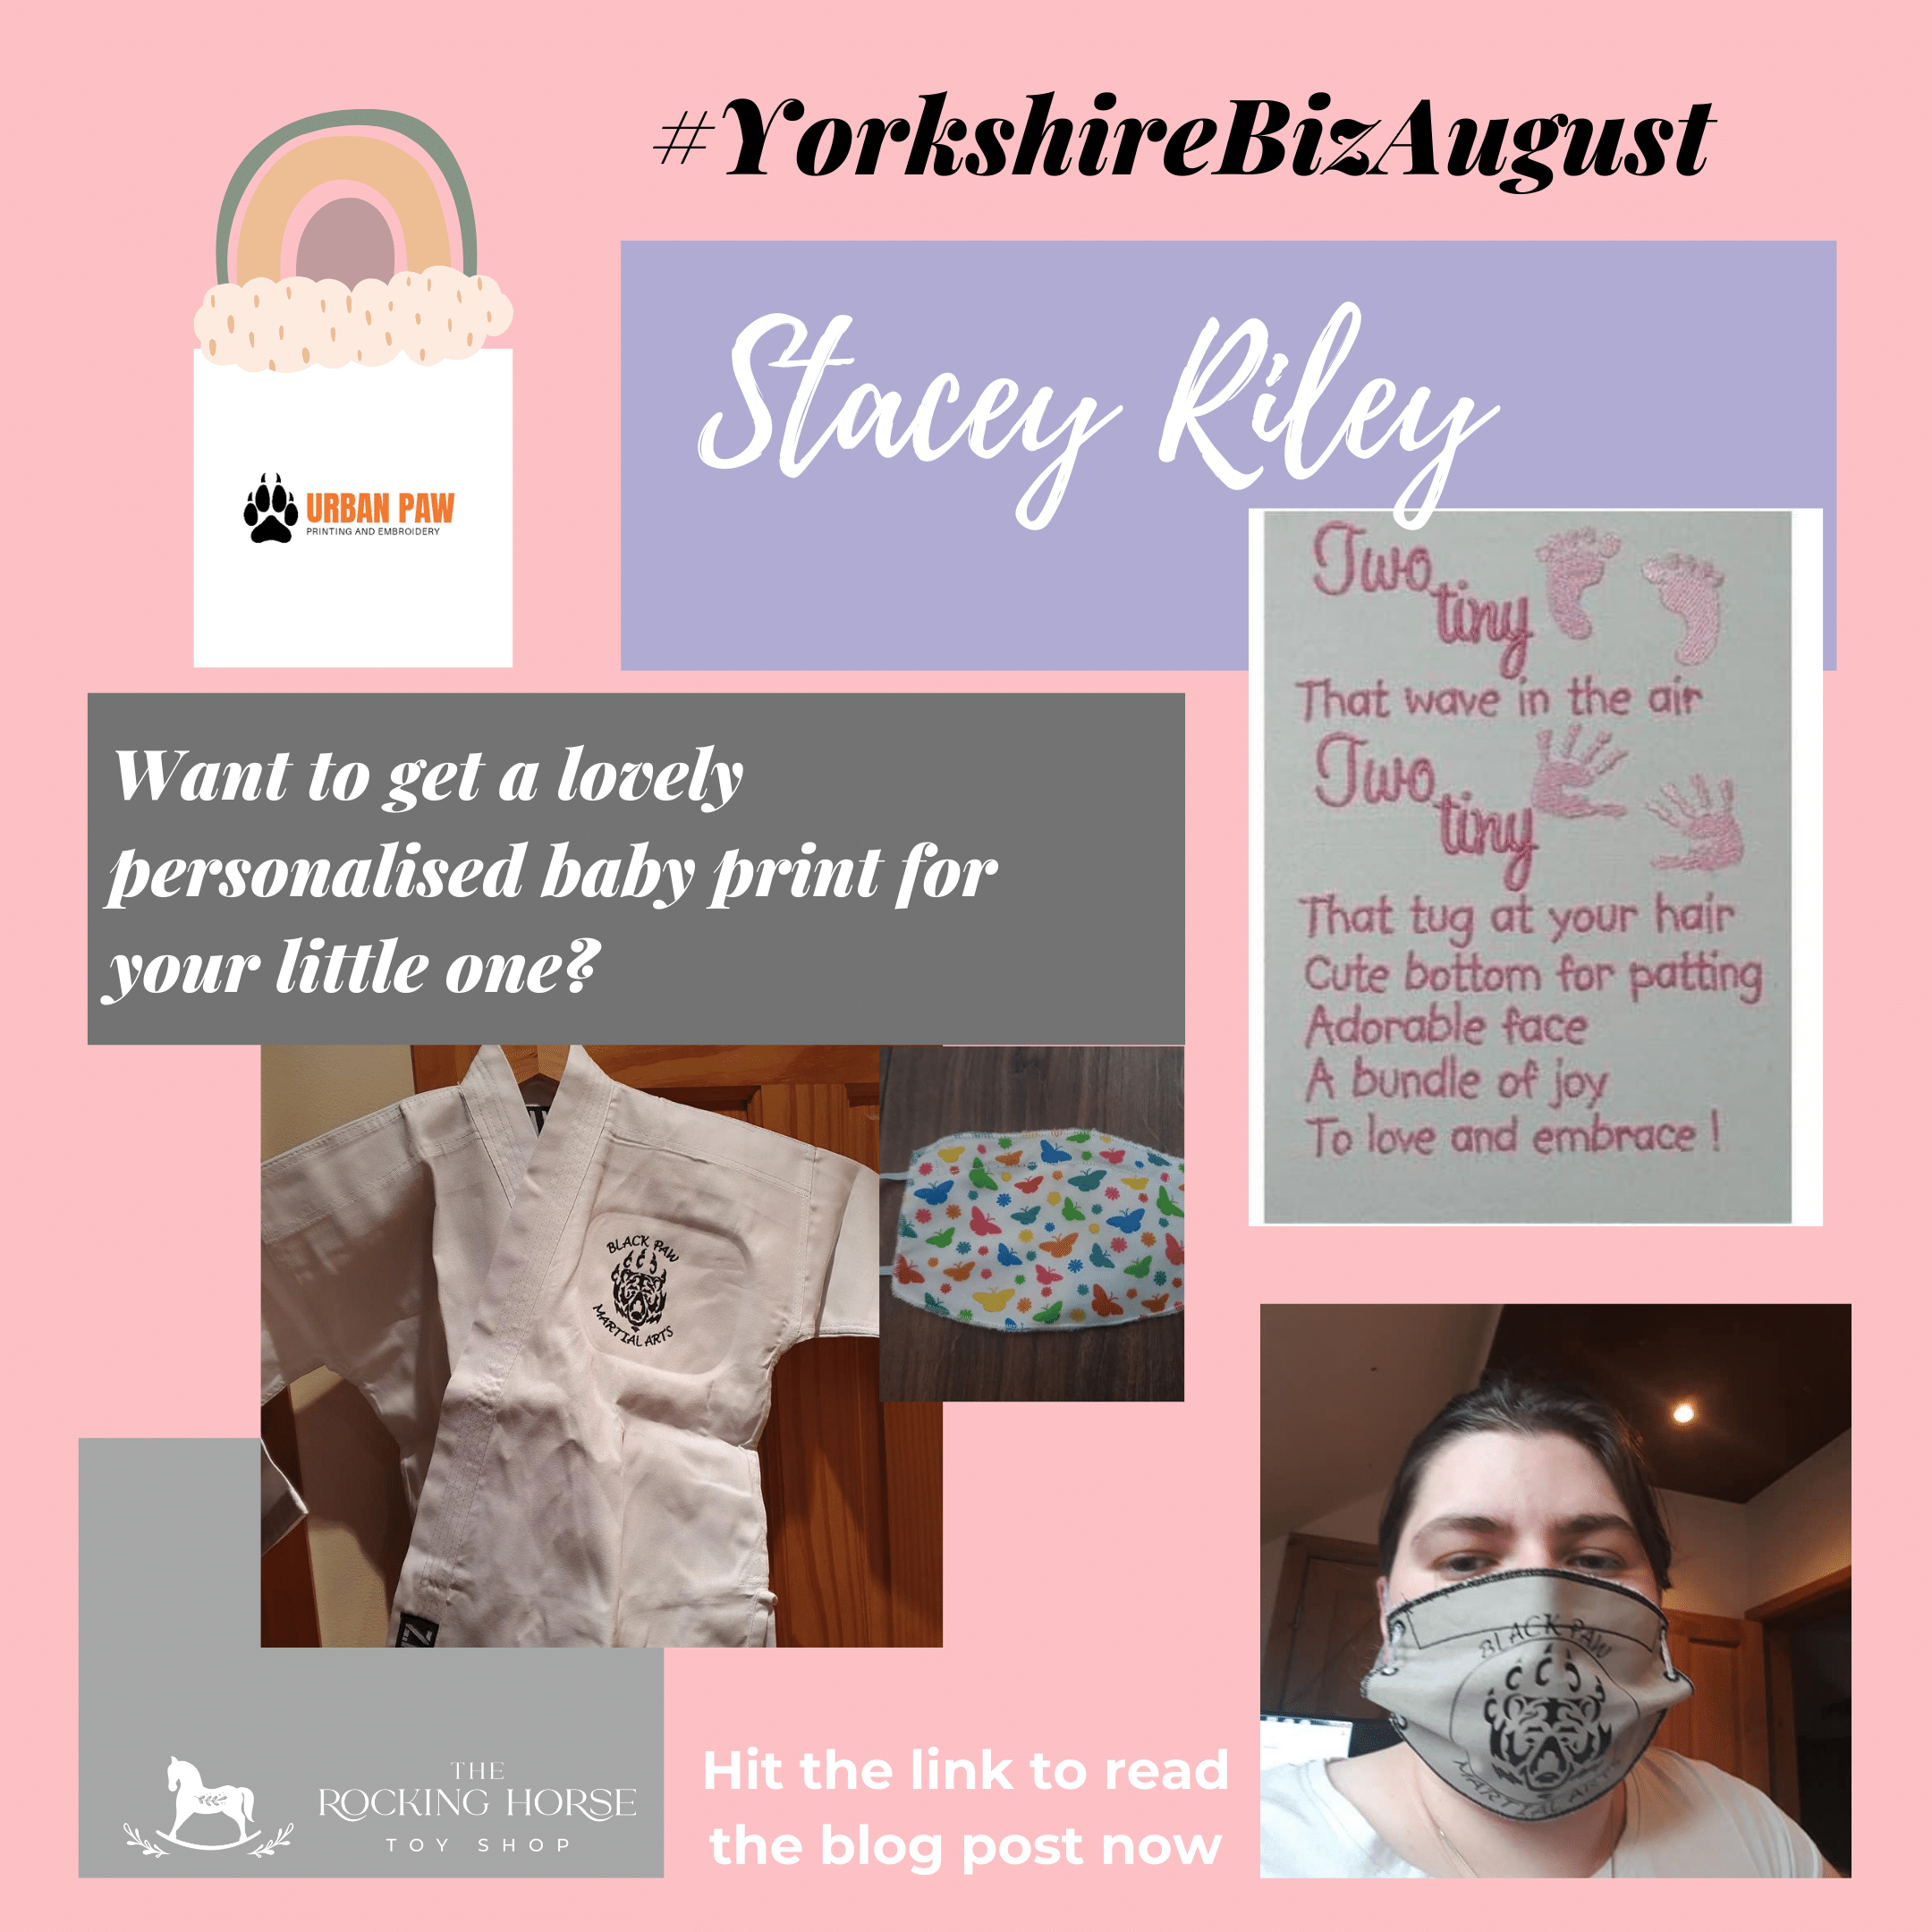 Yorkshire Biz August 22 - Stacey Riley - Urban Paw Printing and Embroidery